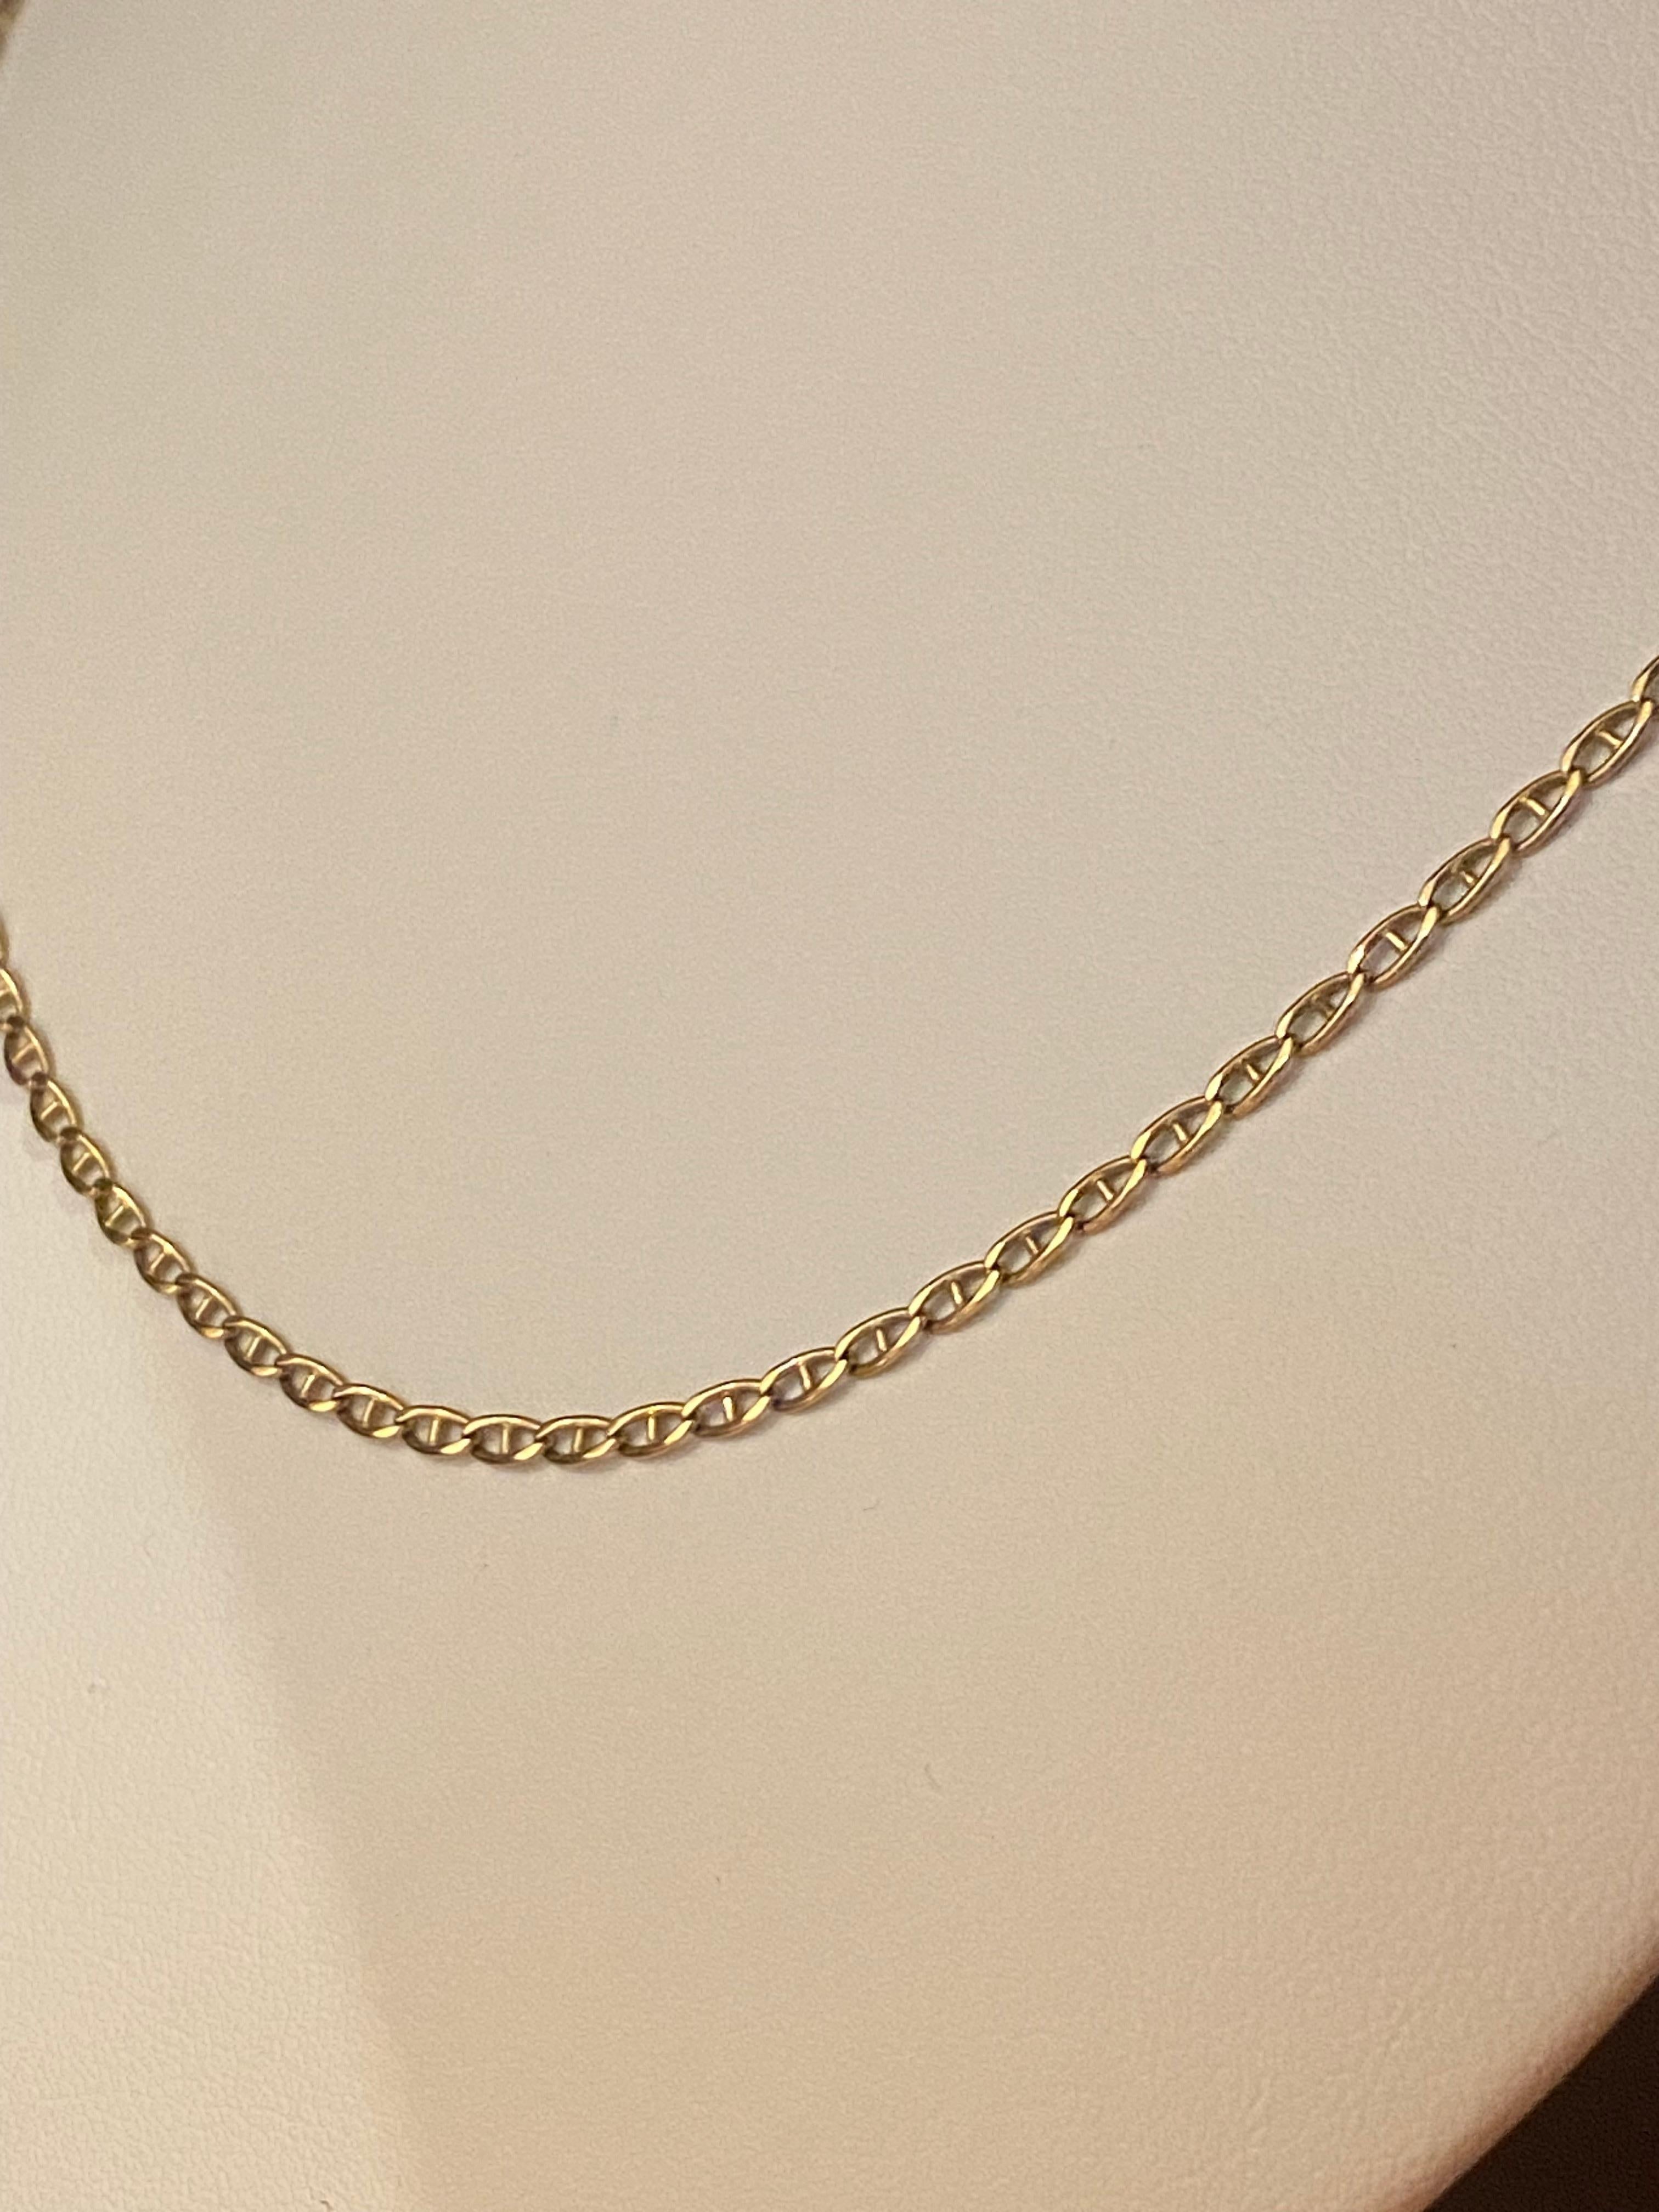 Women's or Men's 9K 375 Yellow Gold Anchor (Mariner) Links Vintage Chain, 53.5cm, Italy For Sale